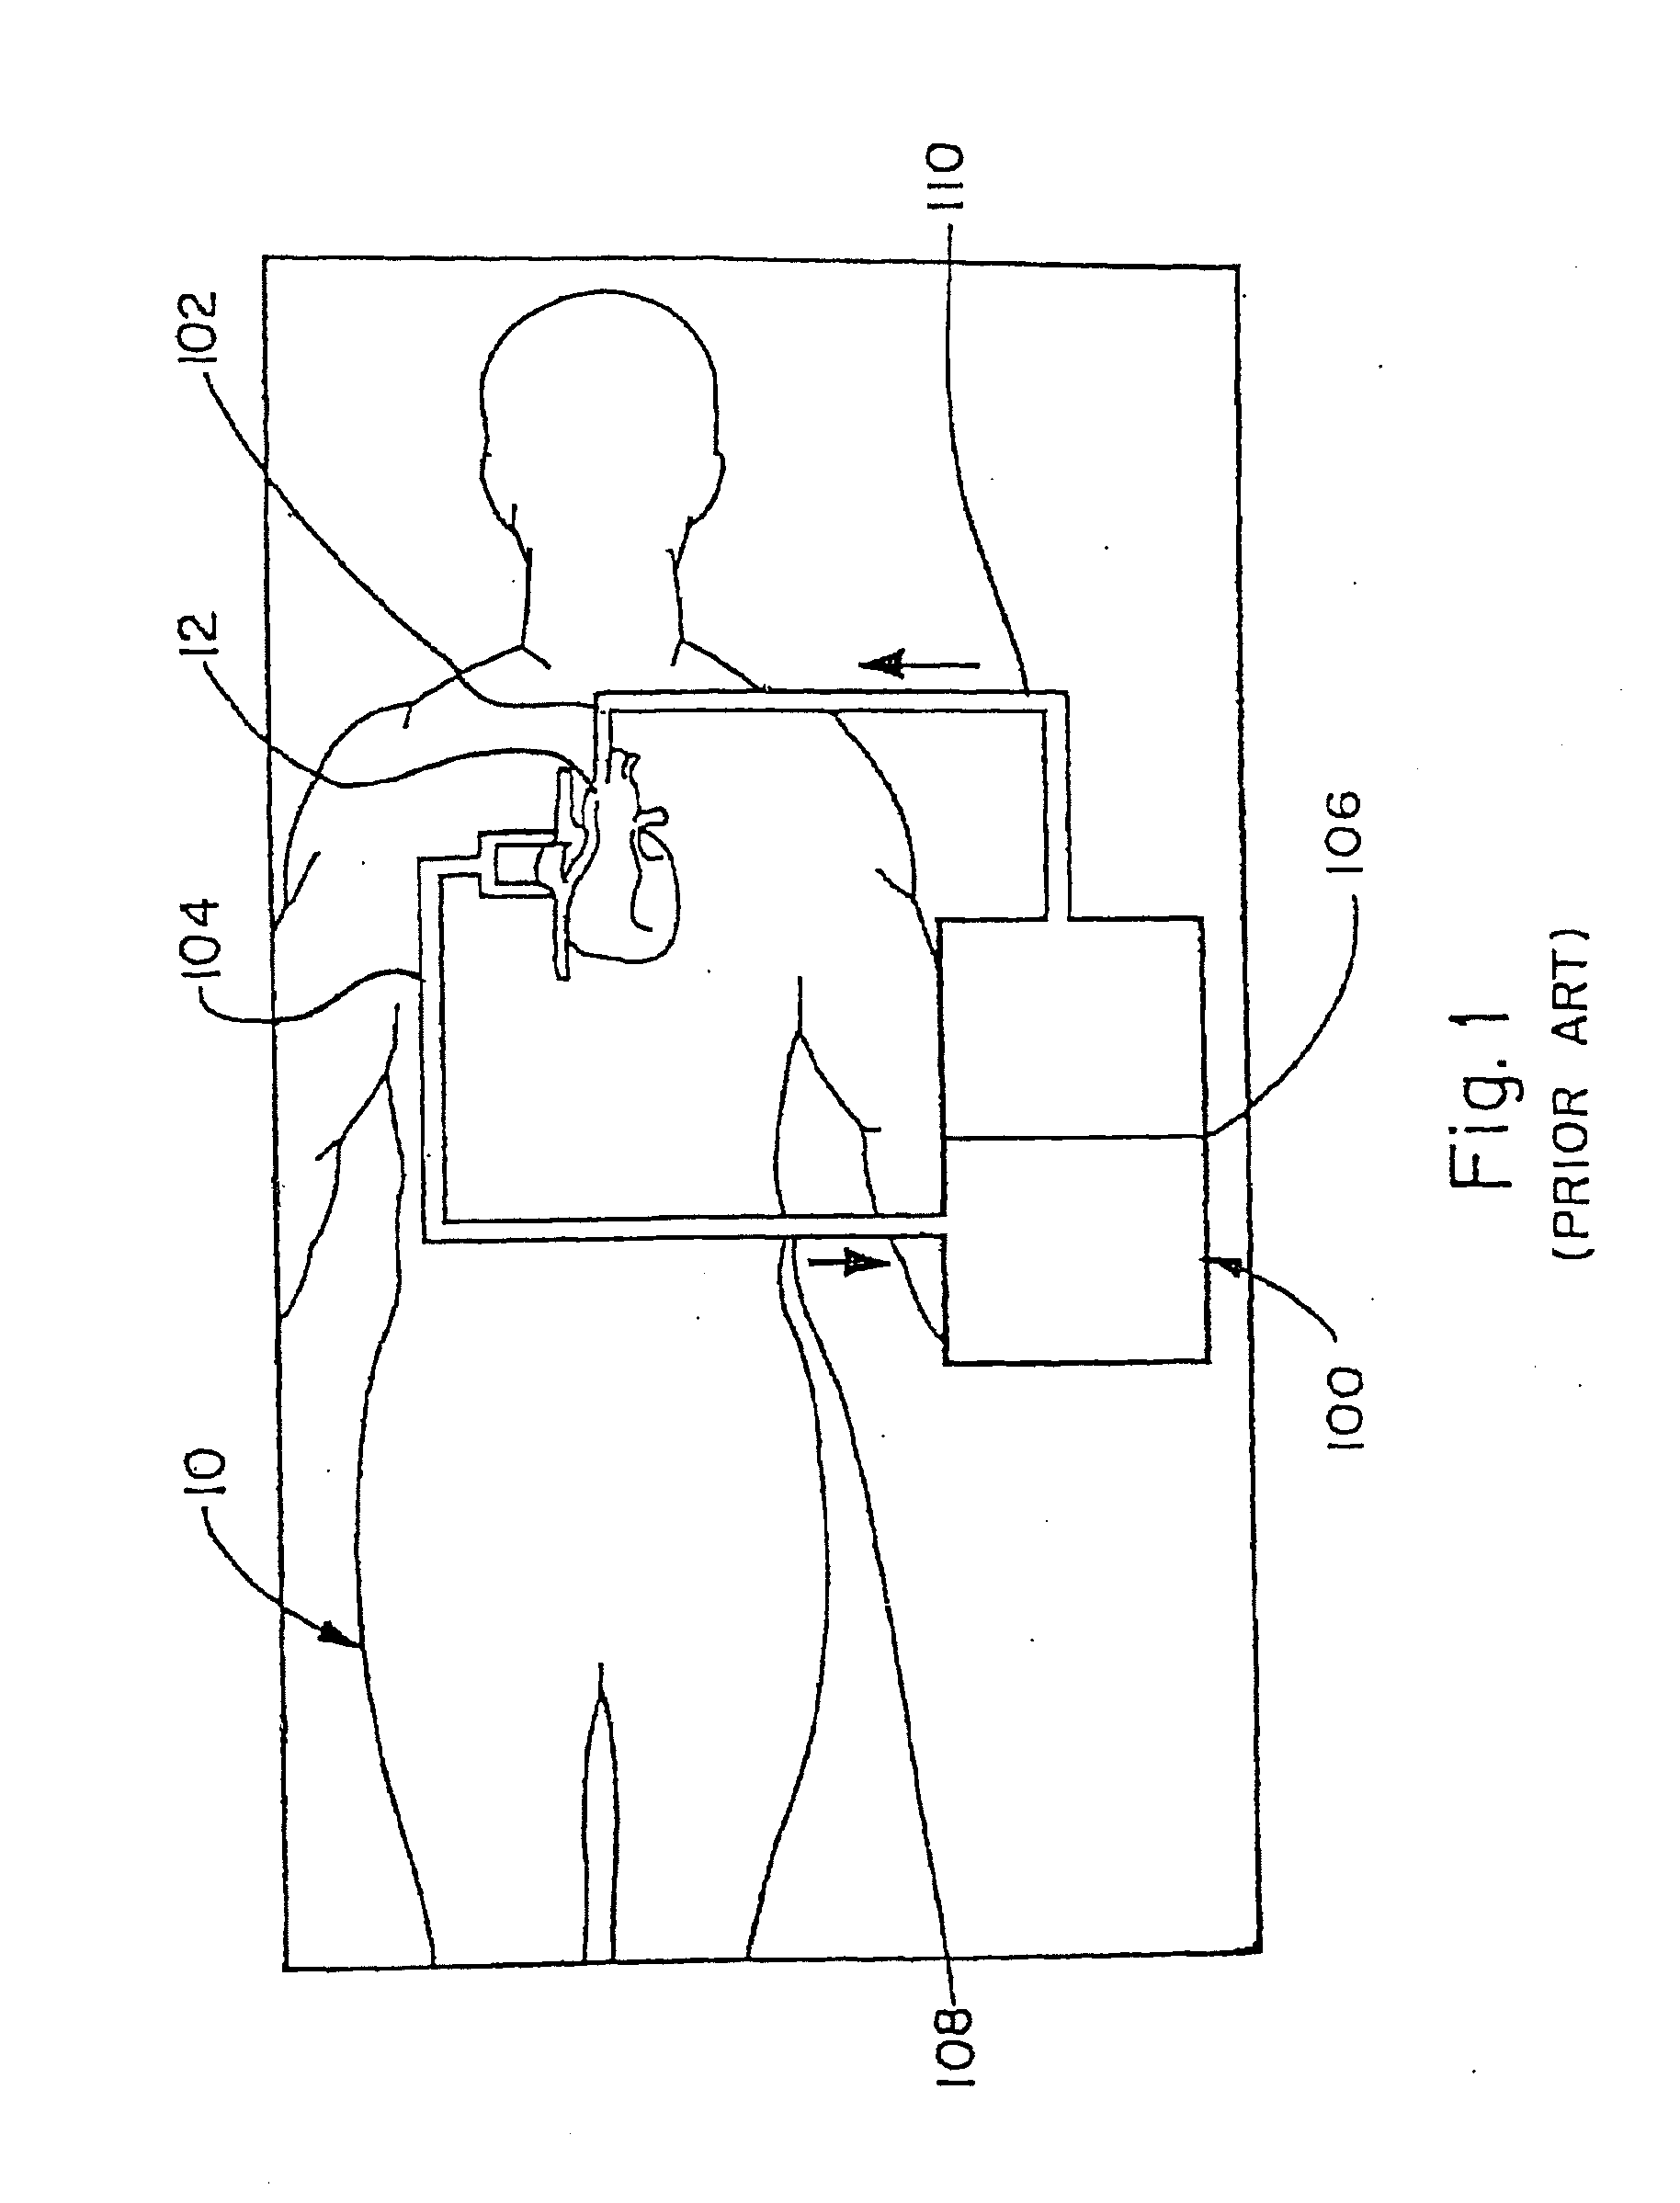 CPB System With Dual Function Blood Reservoir